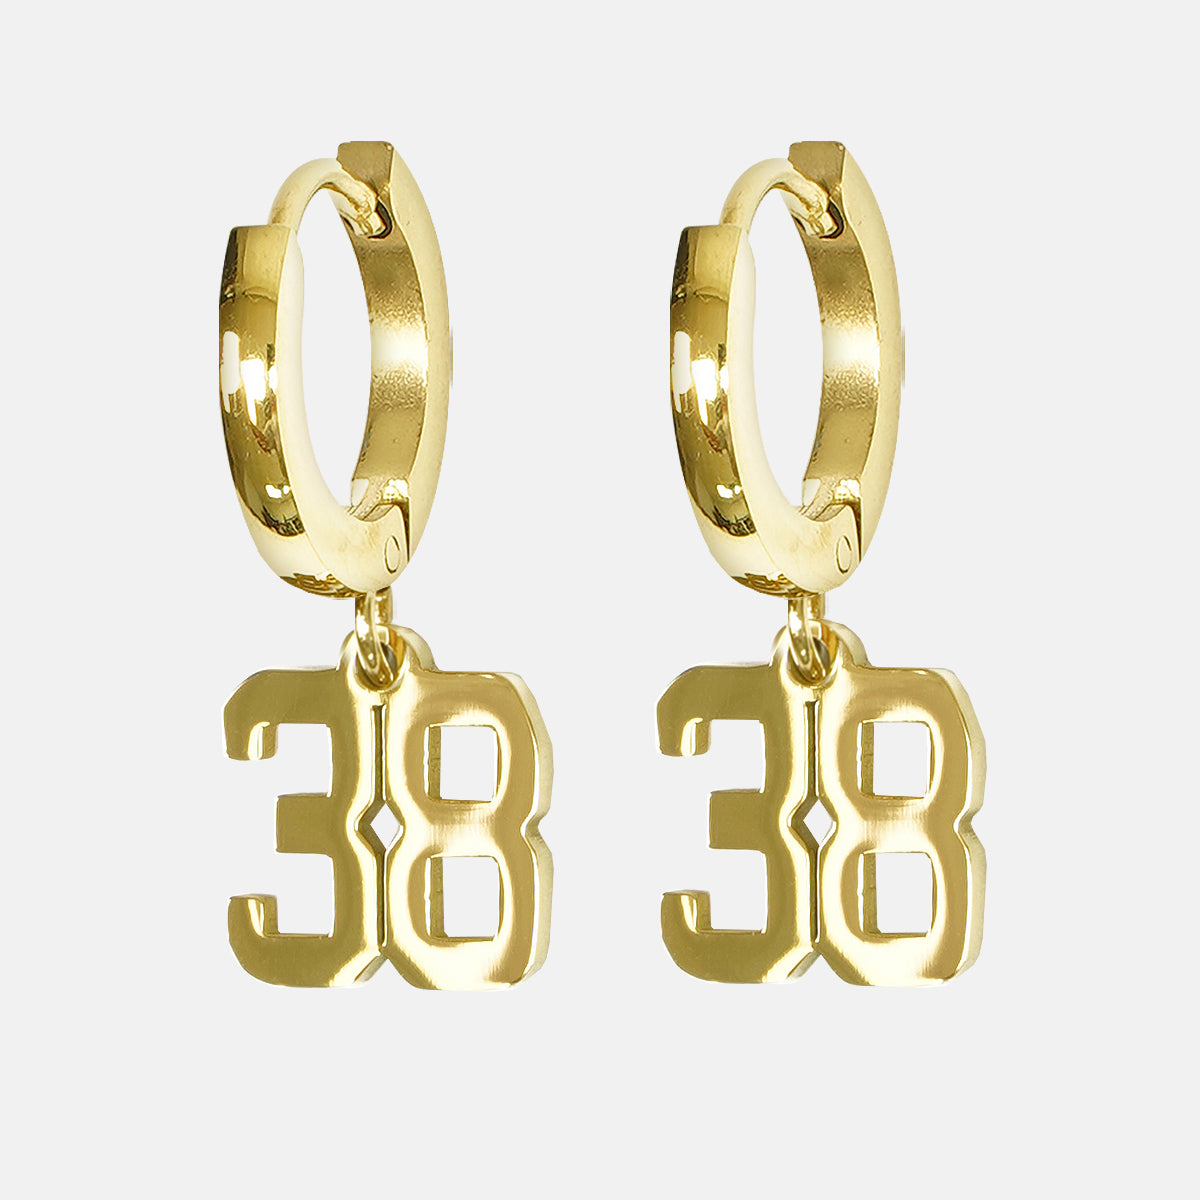 38 Number Earring - Gold Plated Stainless Steel